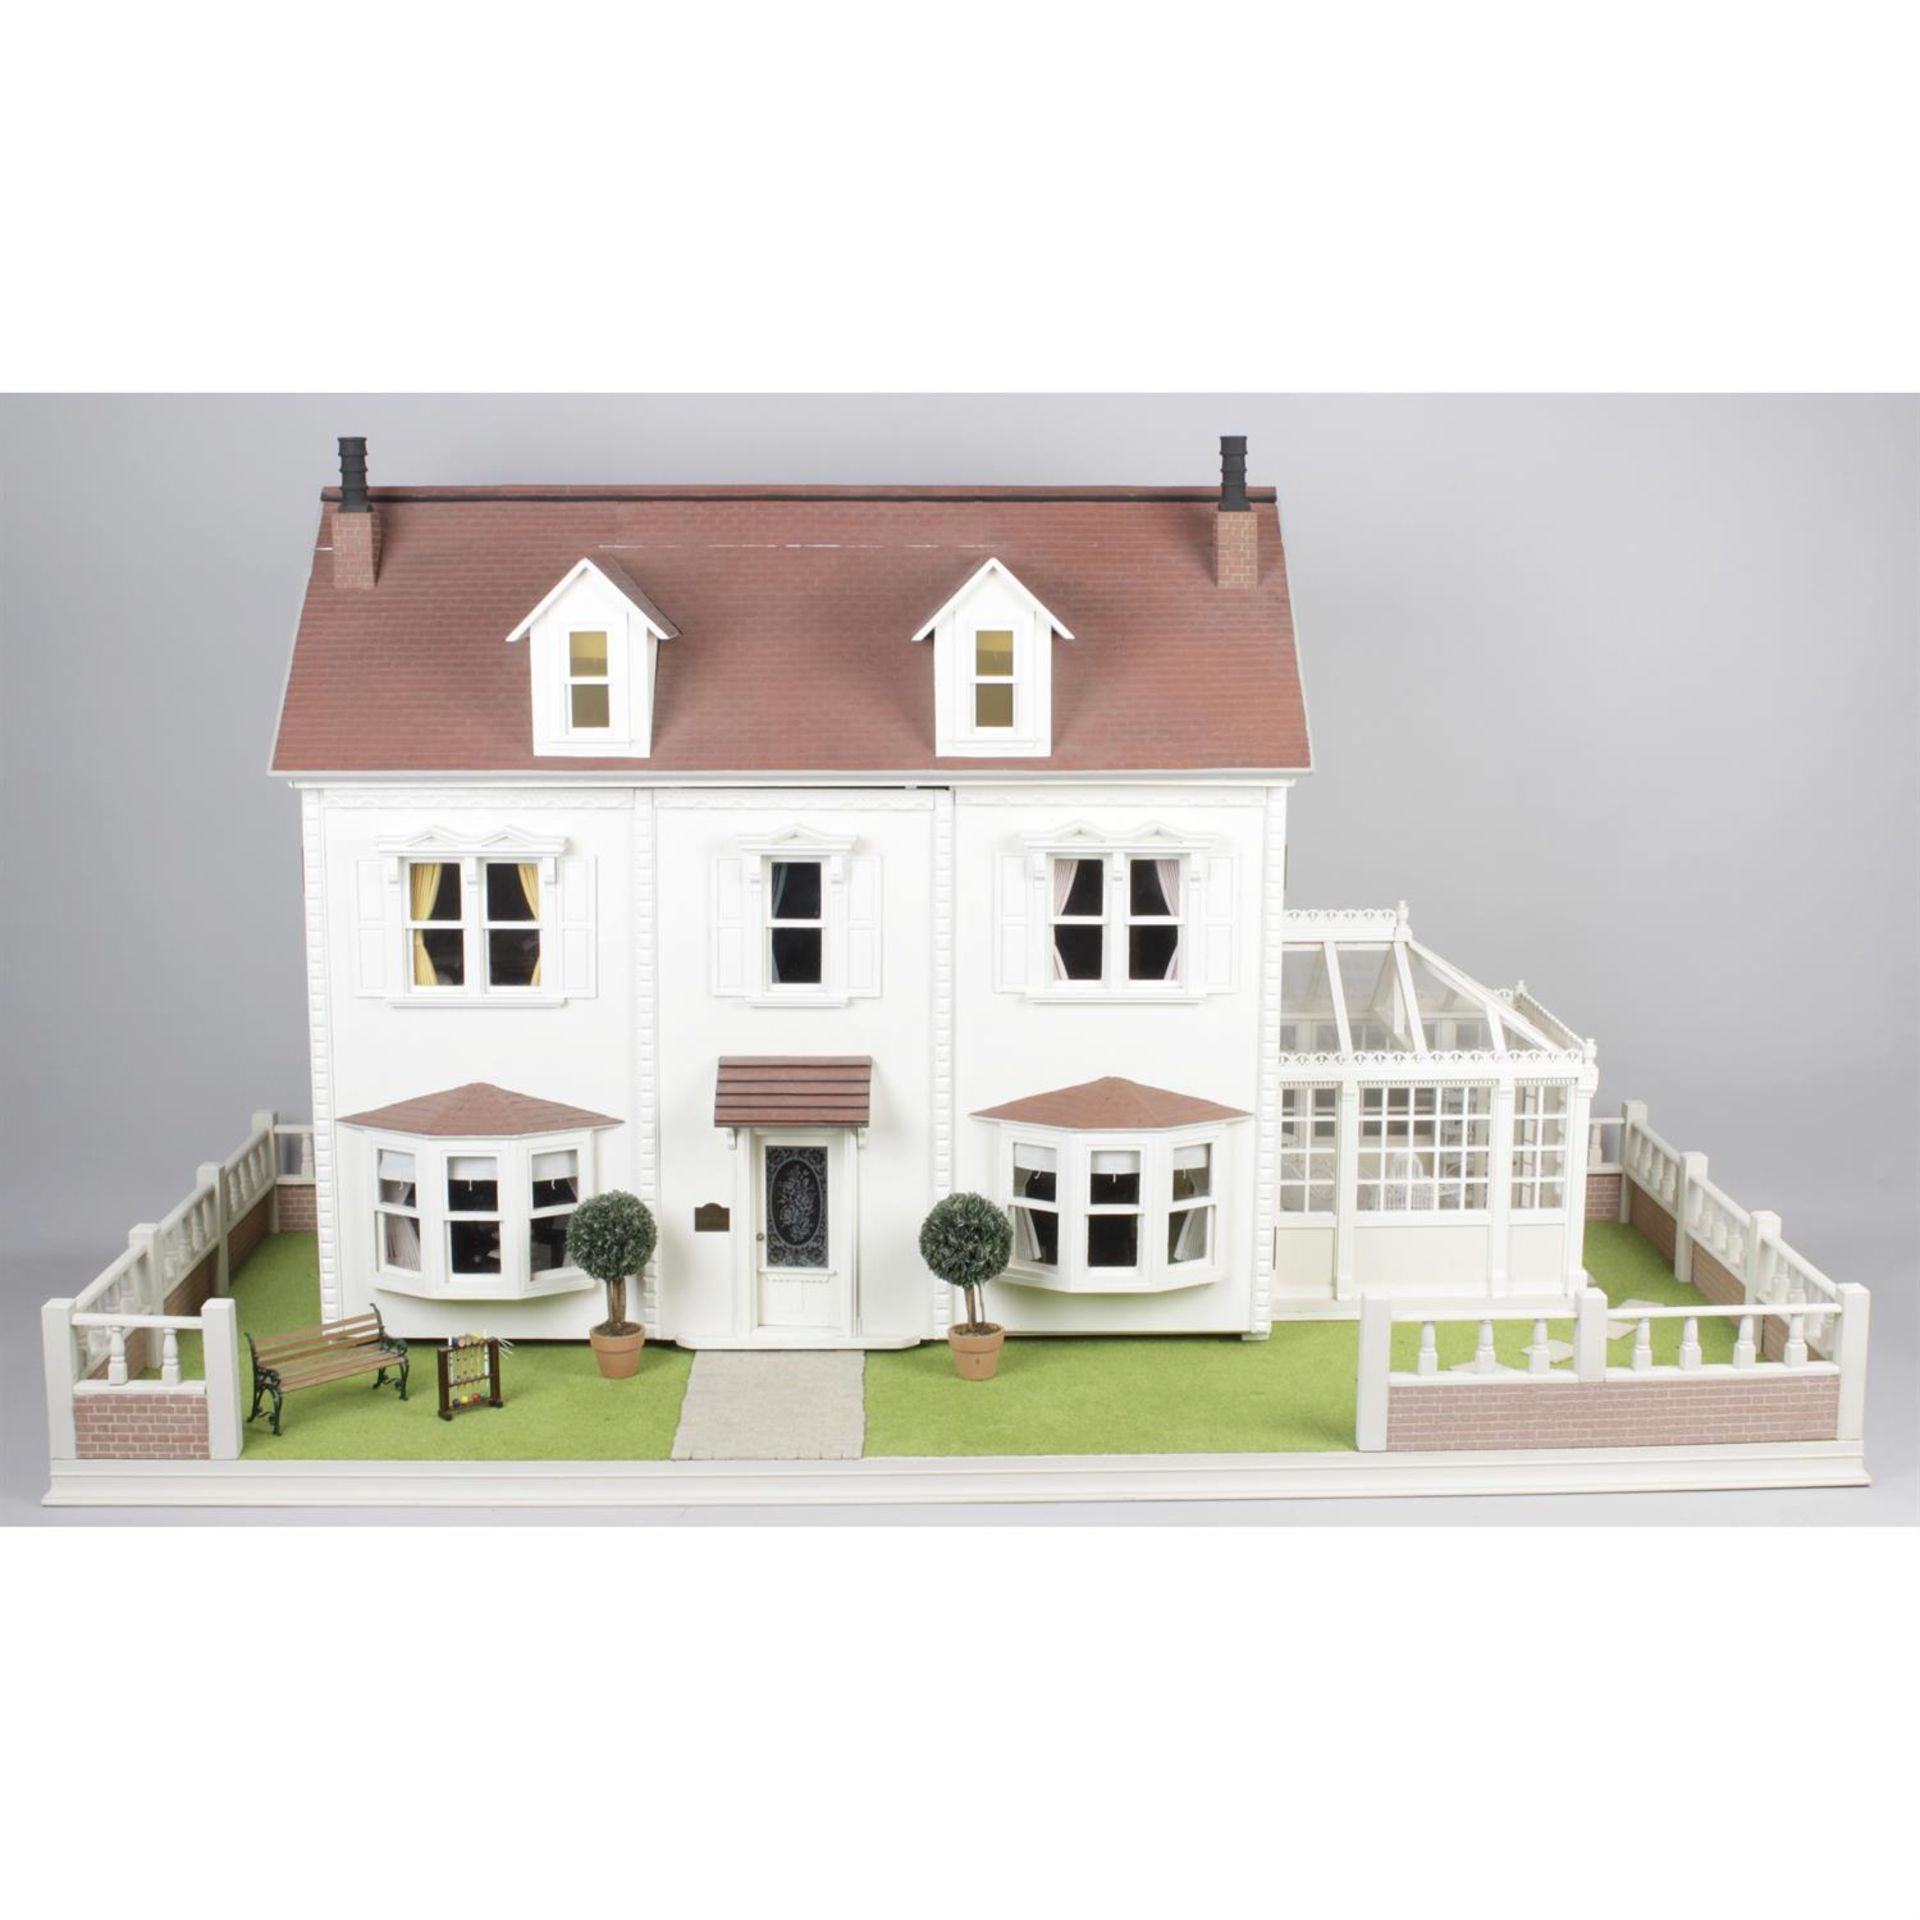 A large wooden dolls house.